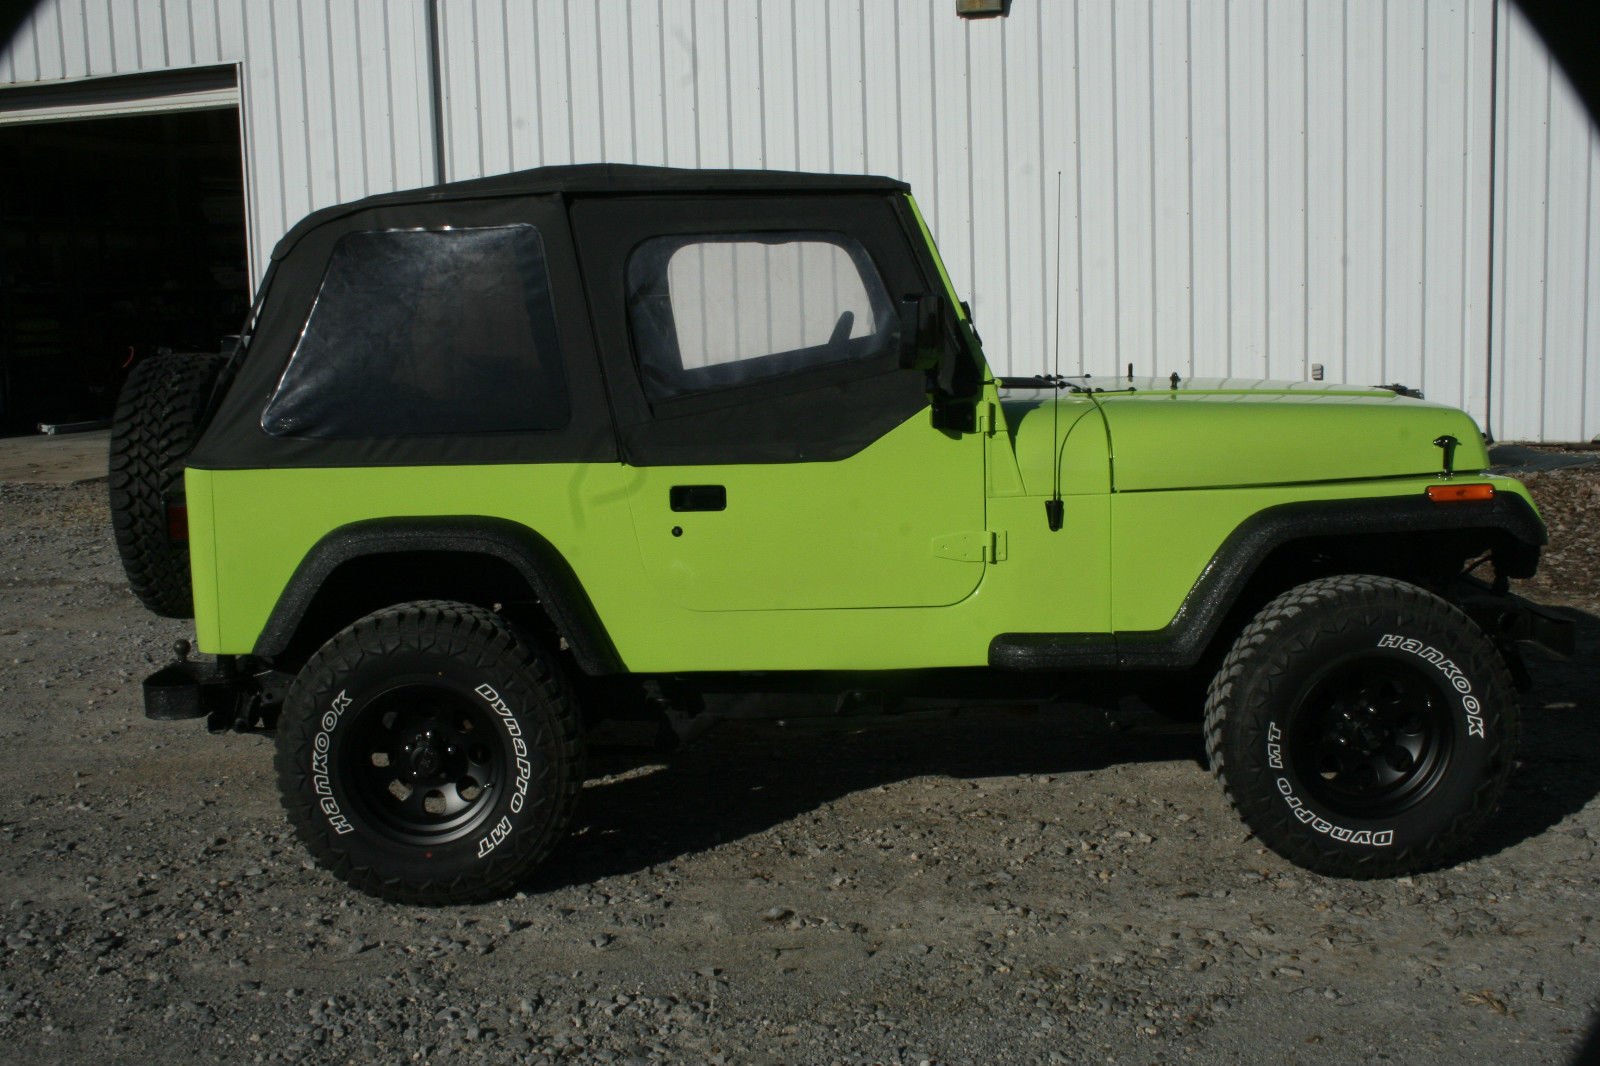 92 Jeep Wrangler Neon Green Interior Lined With Bedliner